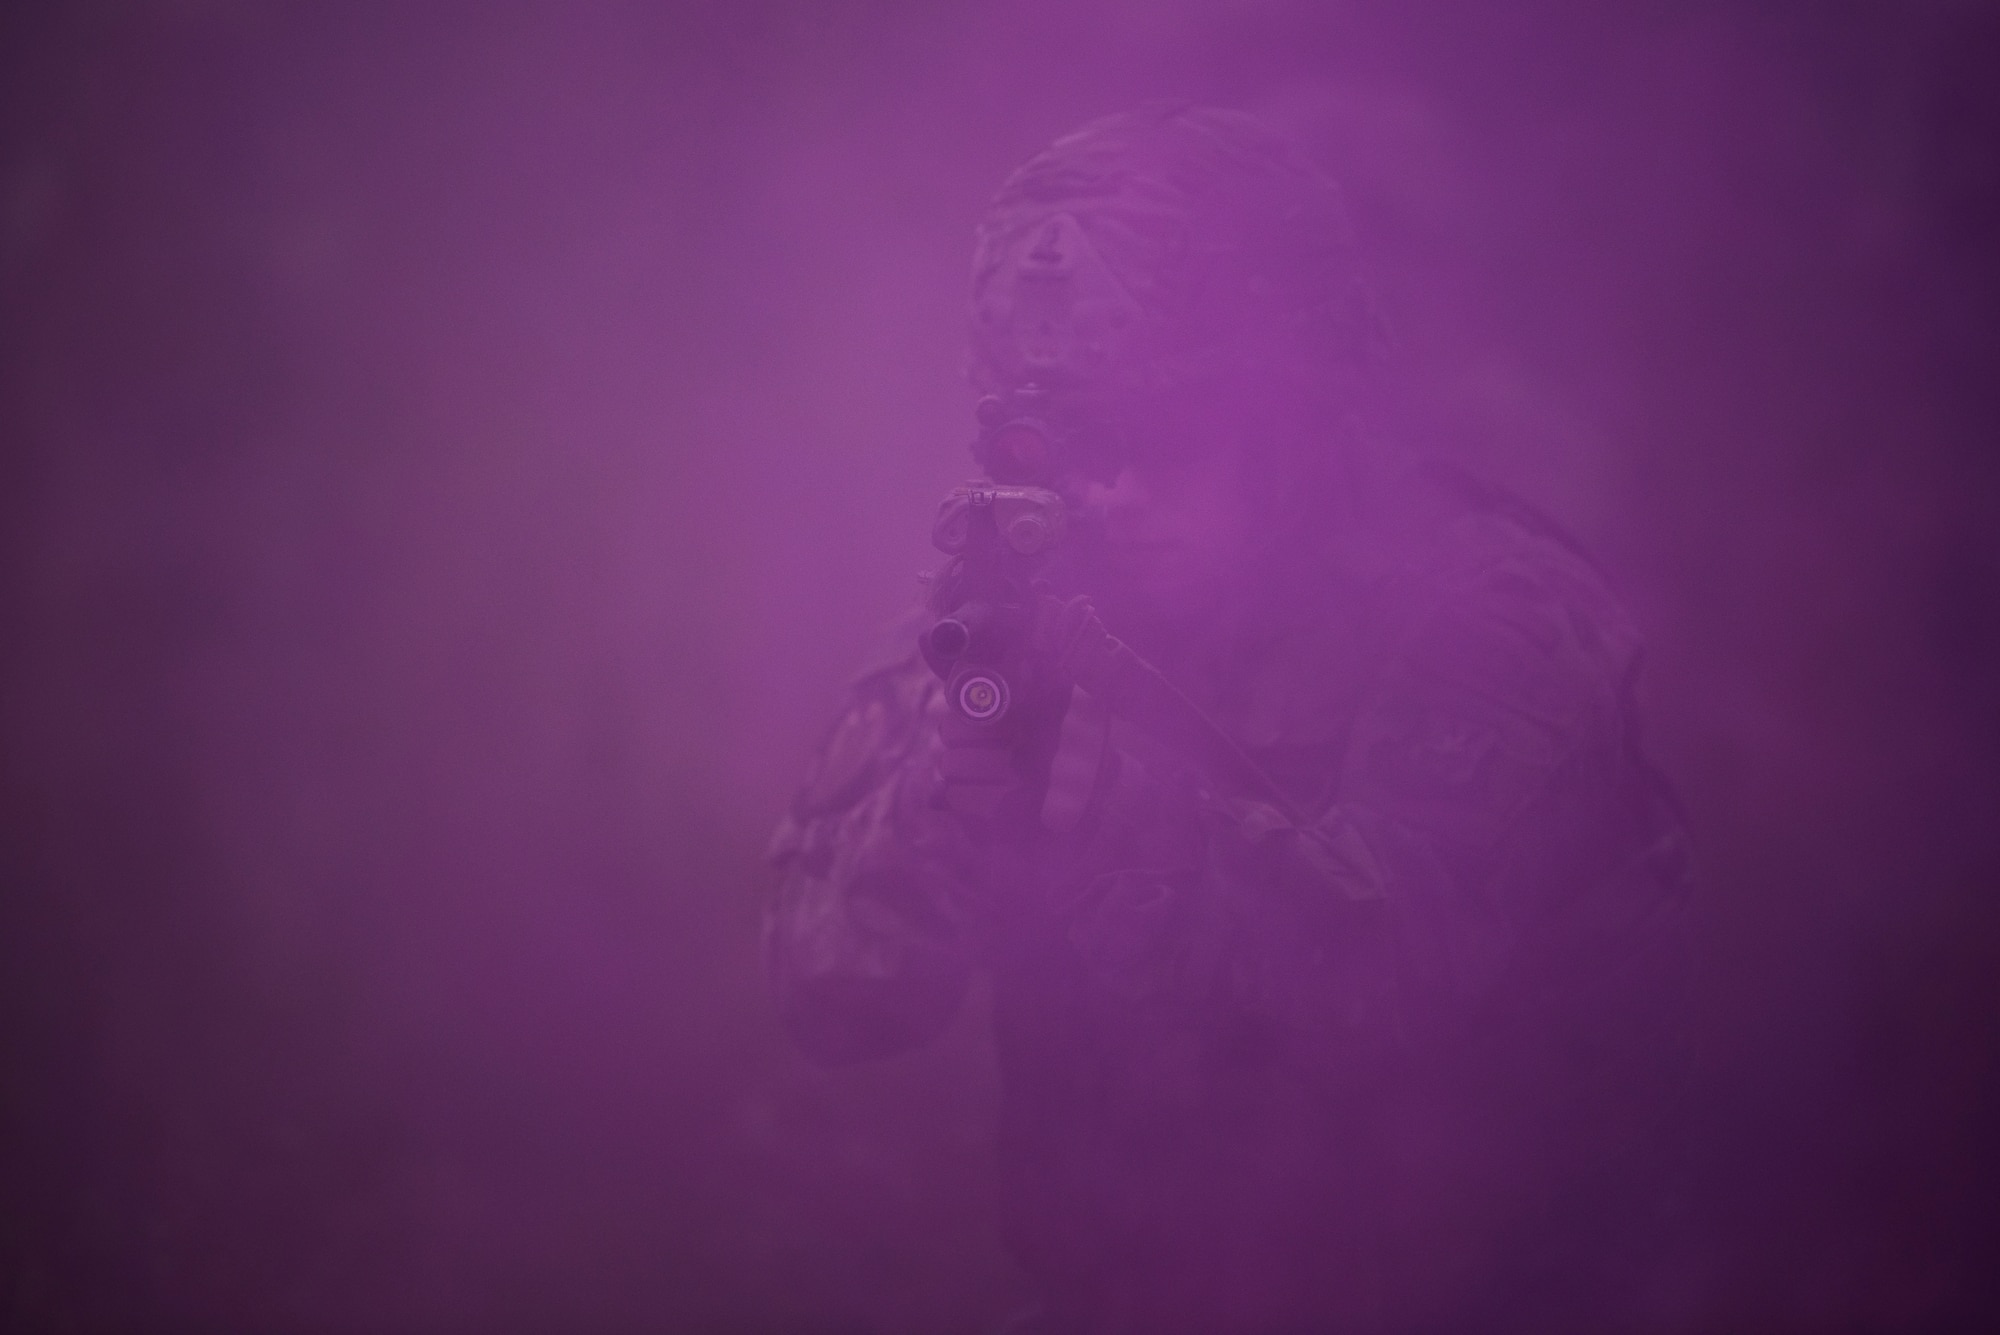 A member of the 823rd Base Defense Squadron moves through smoke as concealment from simulated enemy forces, Moody Air Force Base, Jan. 12, 2018. The 823rd is one of three operational security forces squadrons under the 820th Base Defense Group whose mission is to provide high-risk force protection and integrated base defense for expeditionary forces. (U.S. Air Force photo by Bennie J. Davis III)